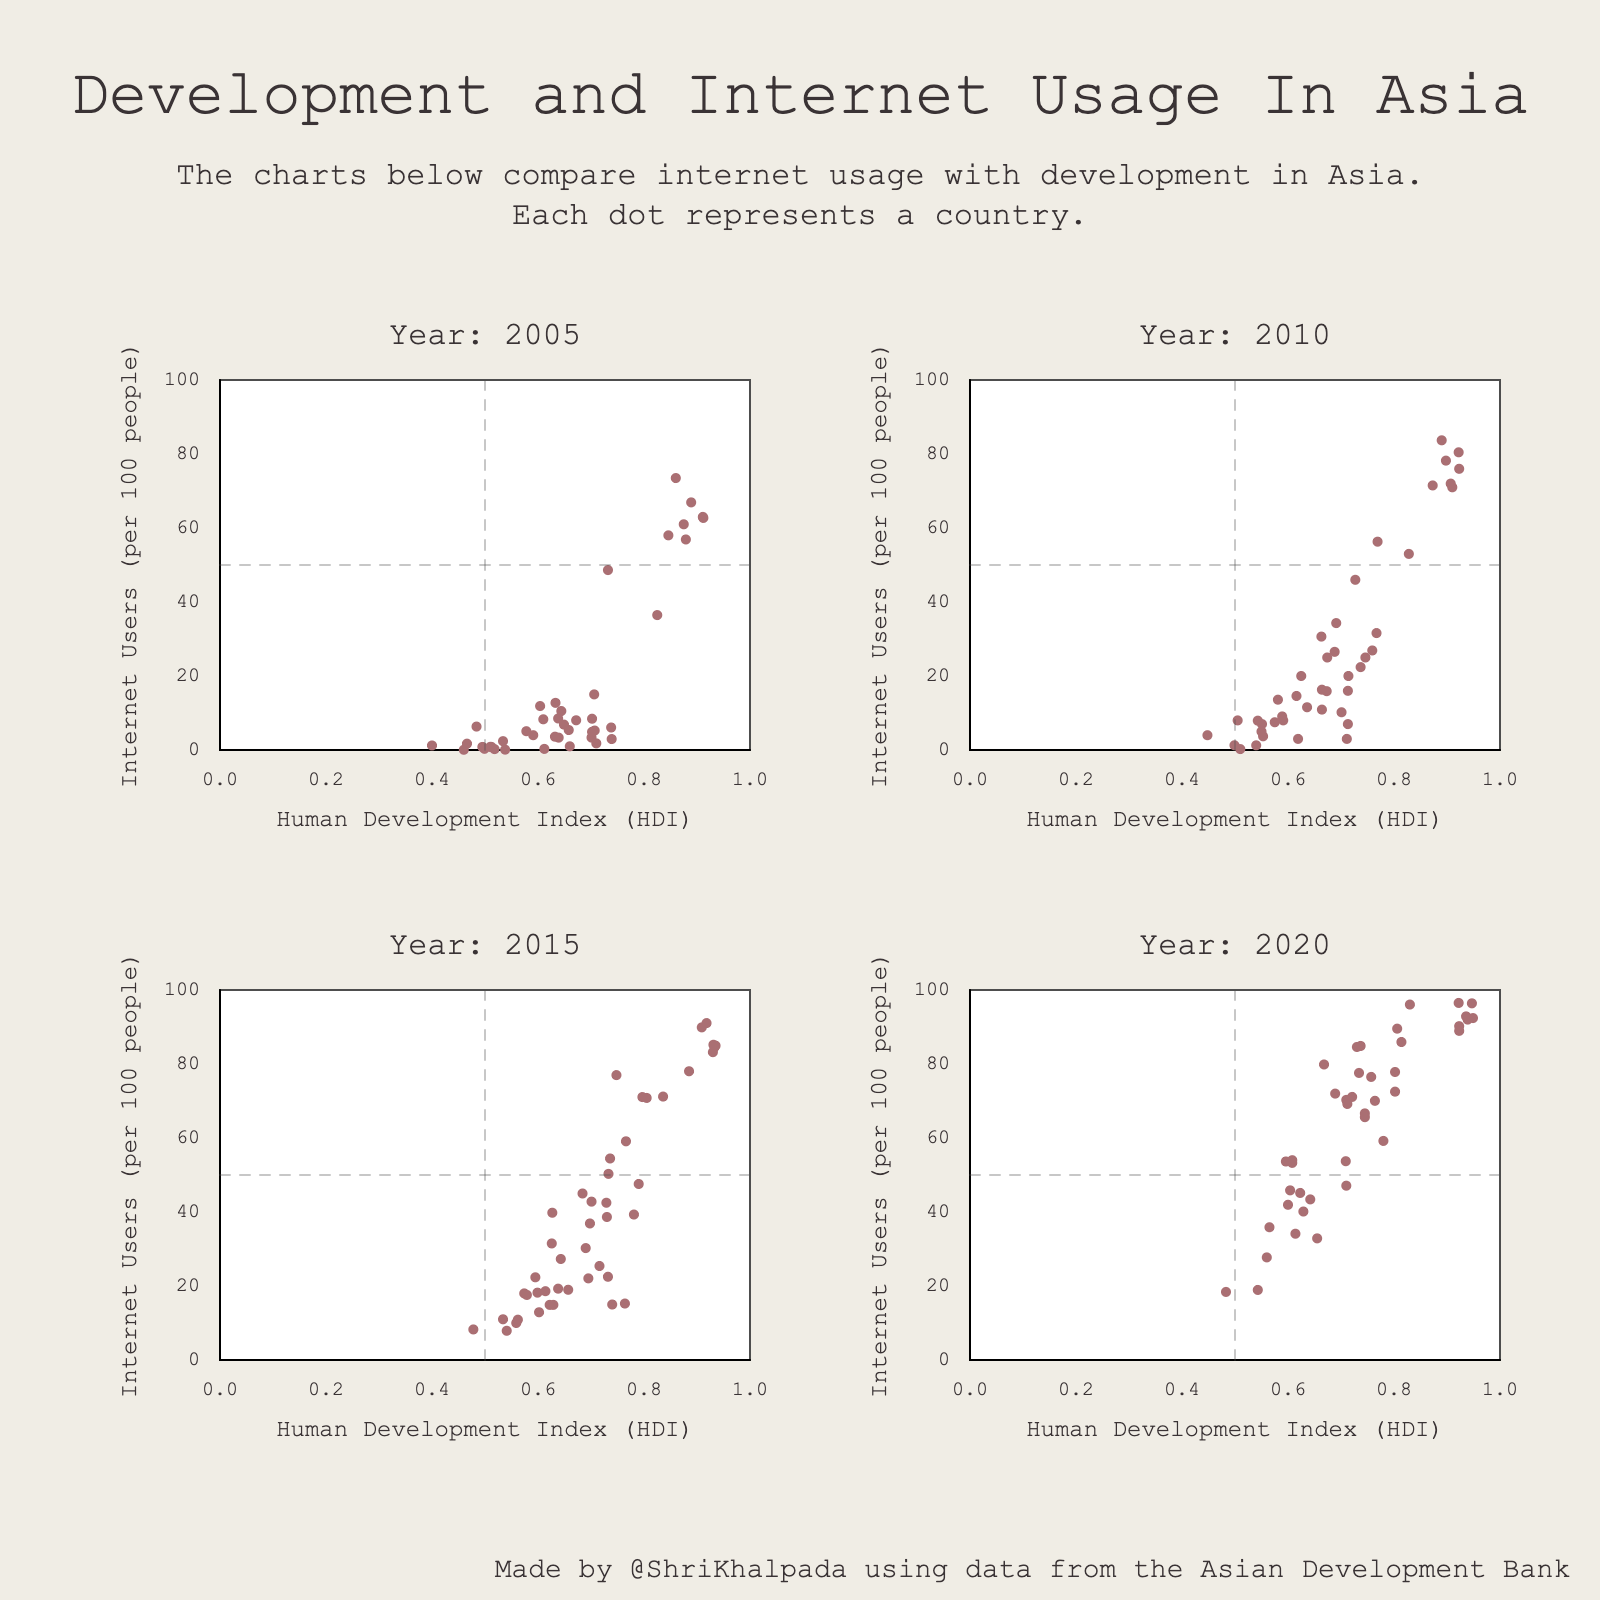 A series of scatter plots titled "Development and Internet Usage In Asia" with four charts representing different years, plotting the Human Development Index against internet usage per 100 people for various Asian countries.